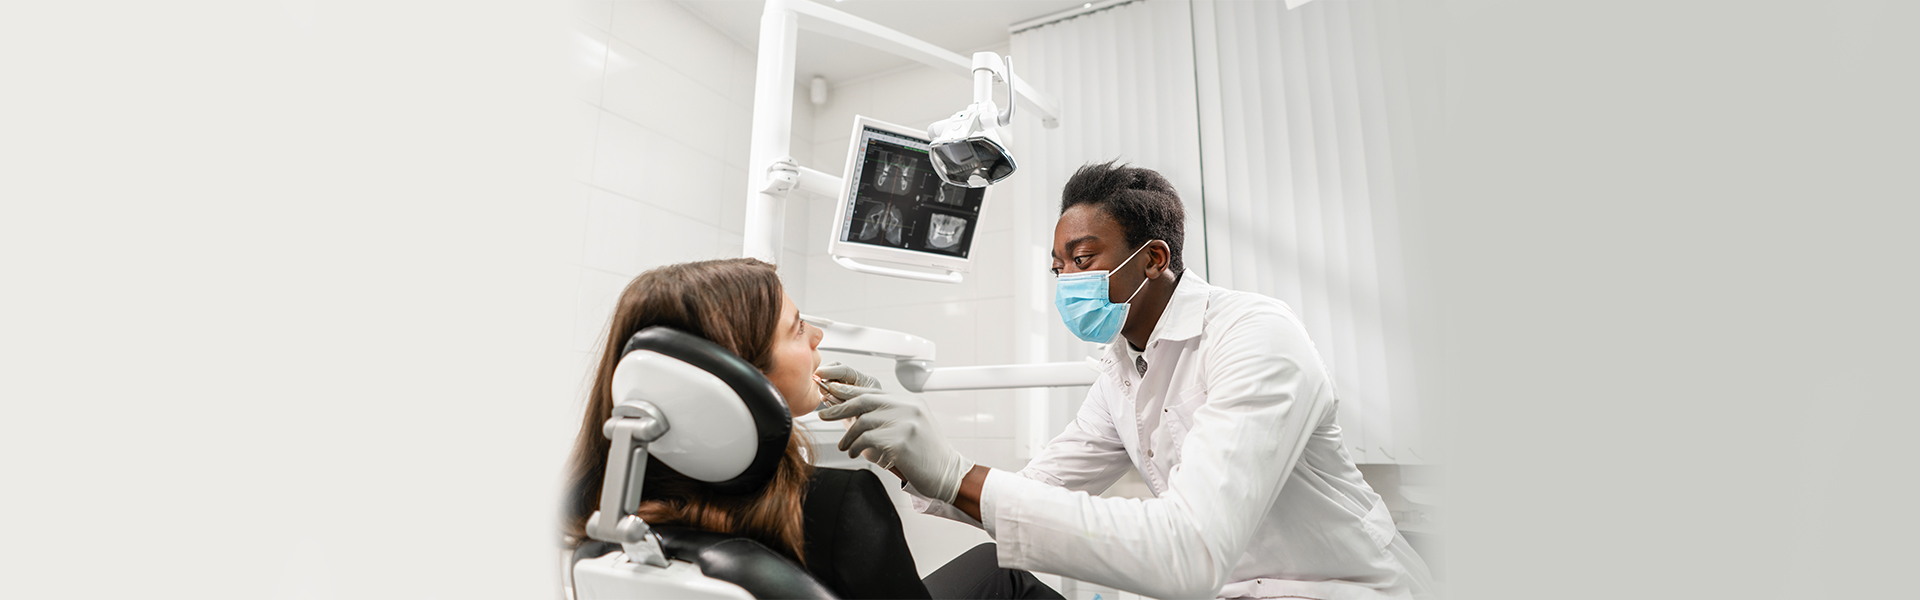 5 myths about root canal treatment you need to know